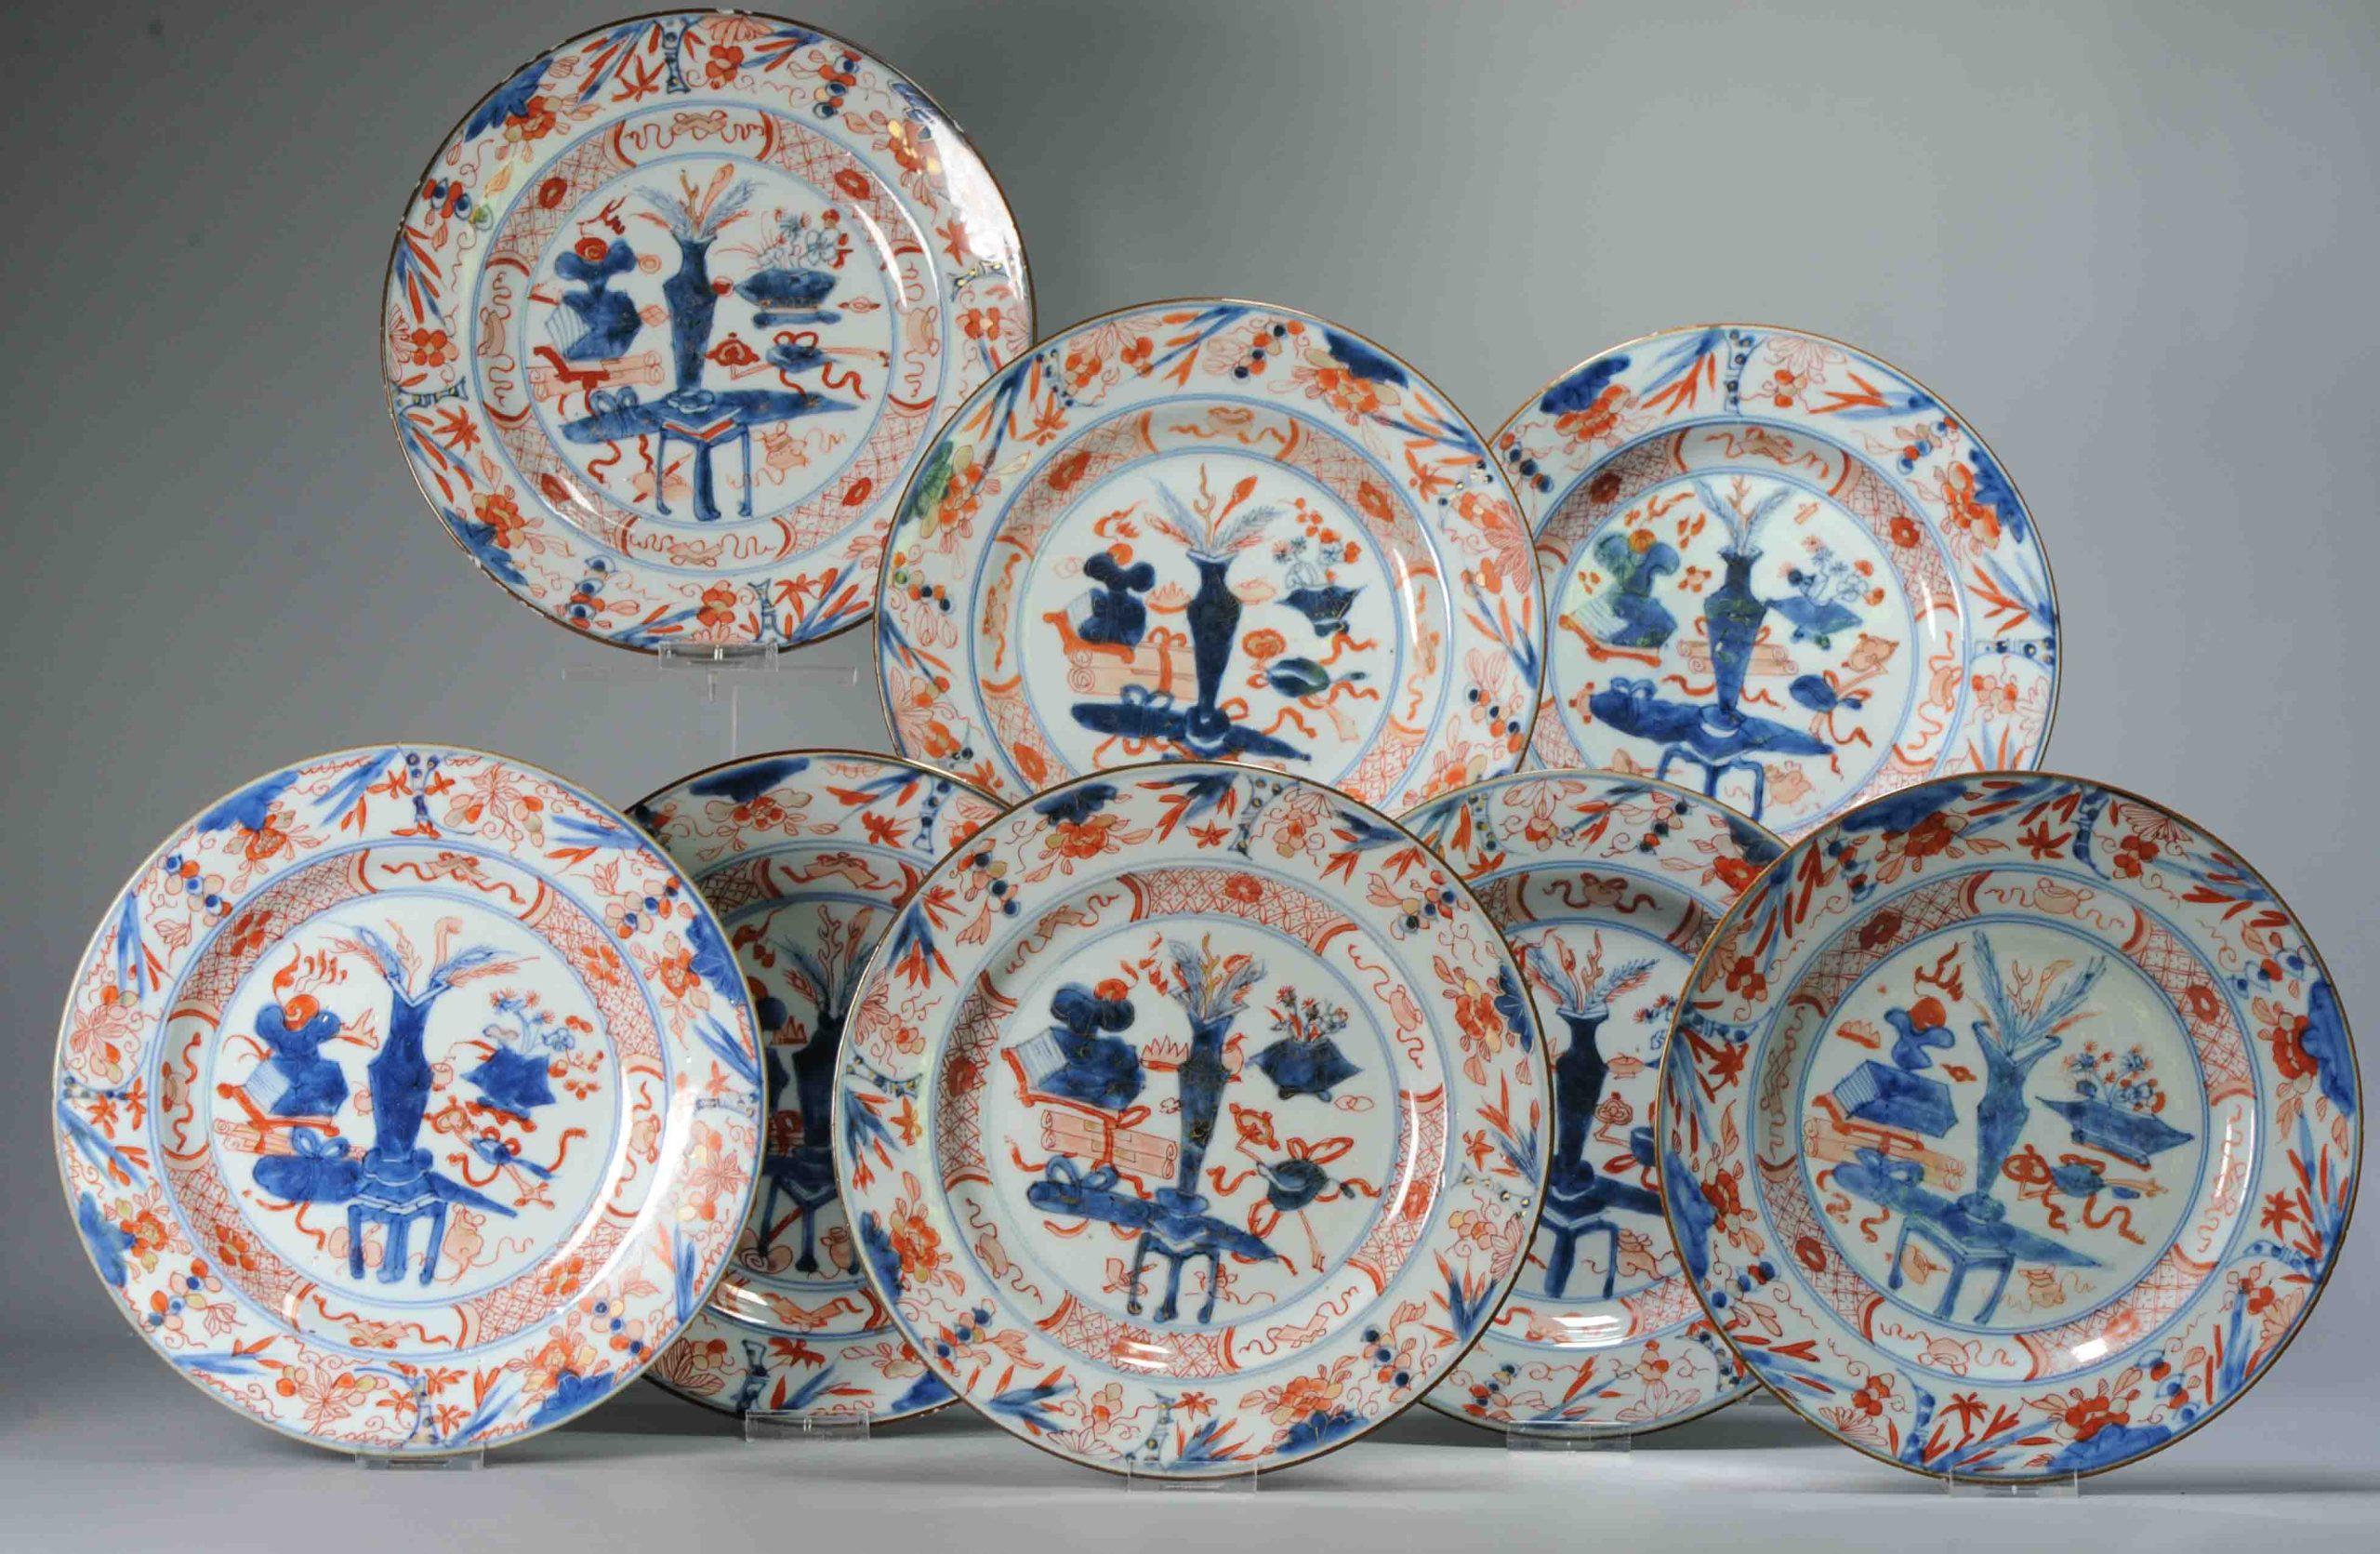 A very nicely decorated SET of 8 dishes in Imari palette with a lovely and high quality landscape scene

Condition
1 dish with chip and hairline, rest of dishes with some frits/small chips (some of them very minimal) Size Size 225x26mm